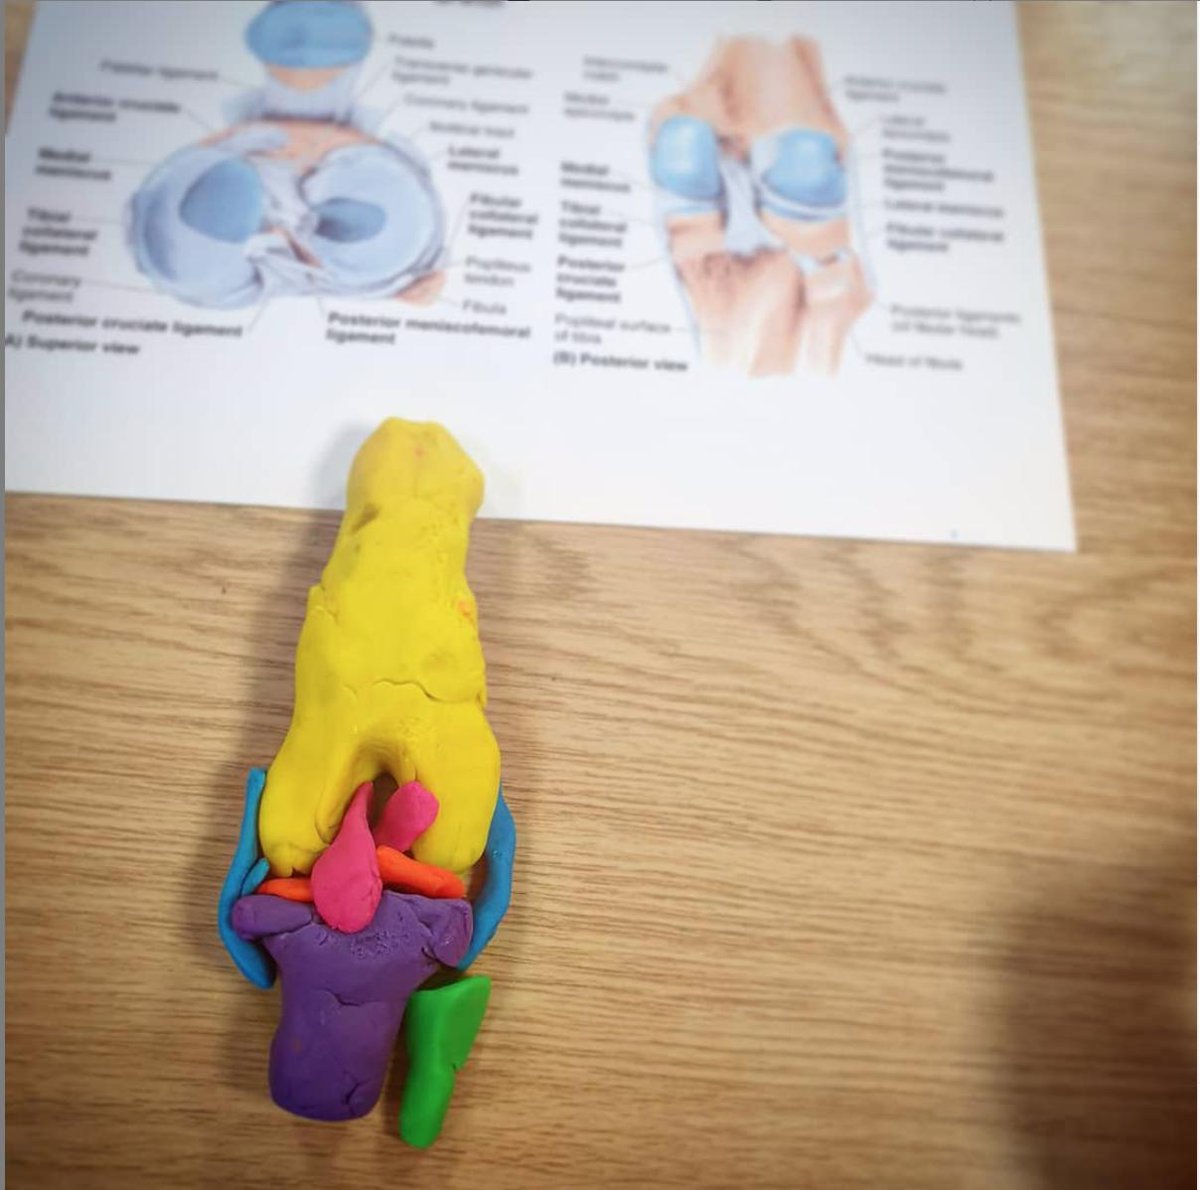 Play-doh joints of the upper & lower limbs using different colours to create bones, articular surfaces and ligaments
#artbeatedinburgh #artandanatomy #playdoh #modelling #humananatomy